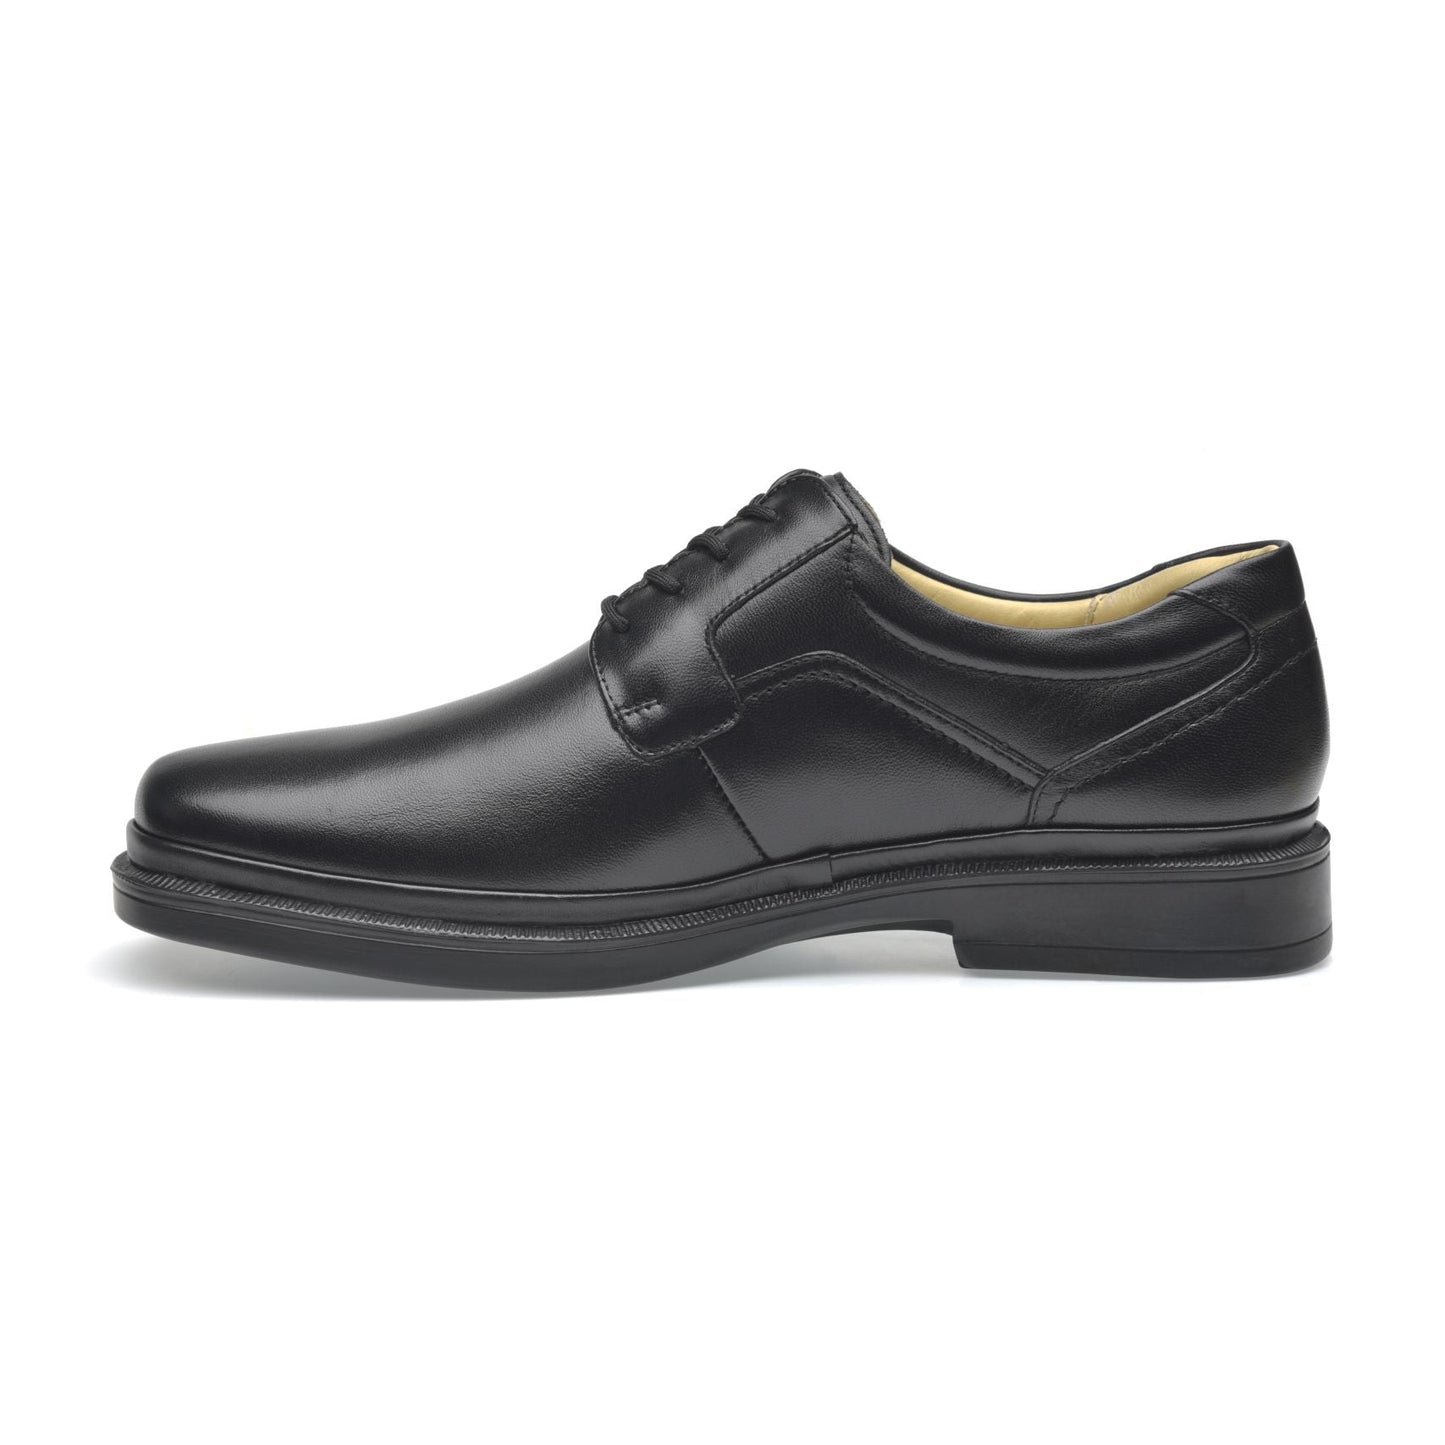 mens lambskin leather shoes comfort by pazstor